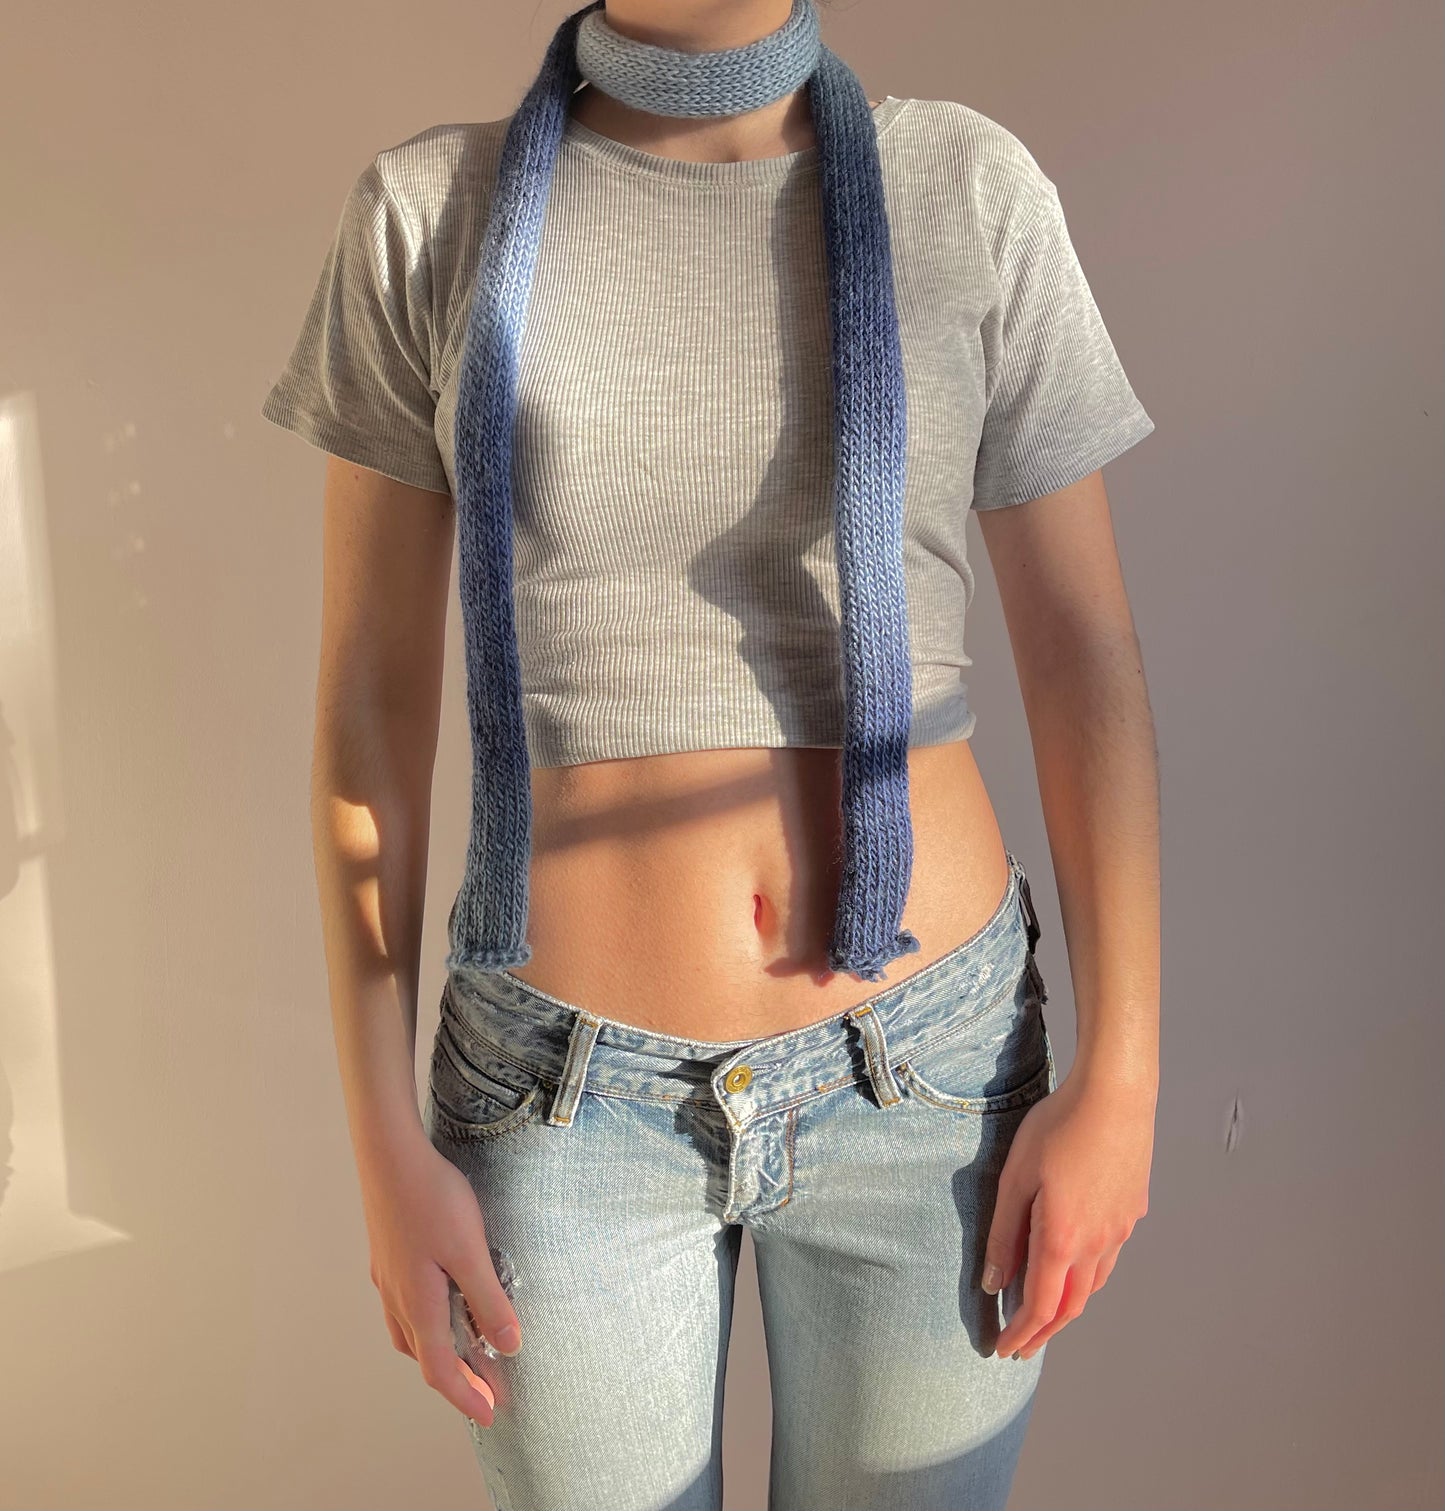 Handmade knitted ombré skinny scarf - blue shades colourway